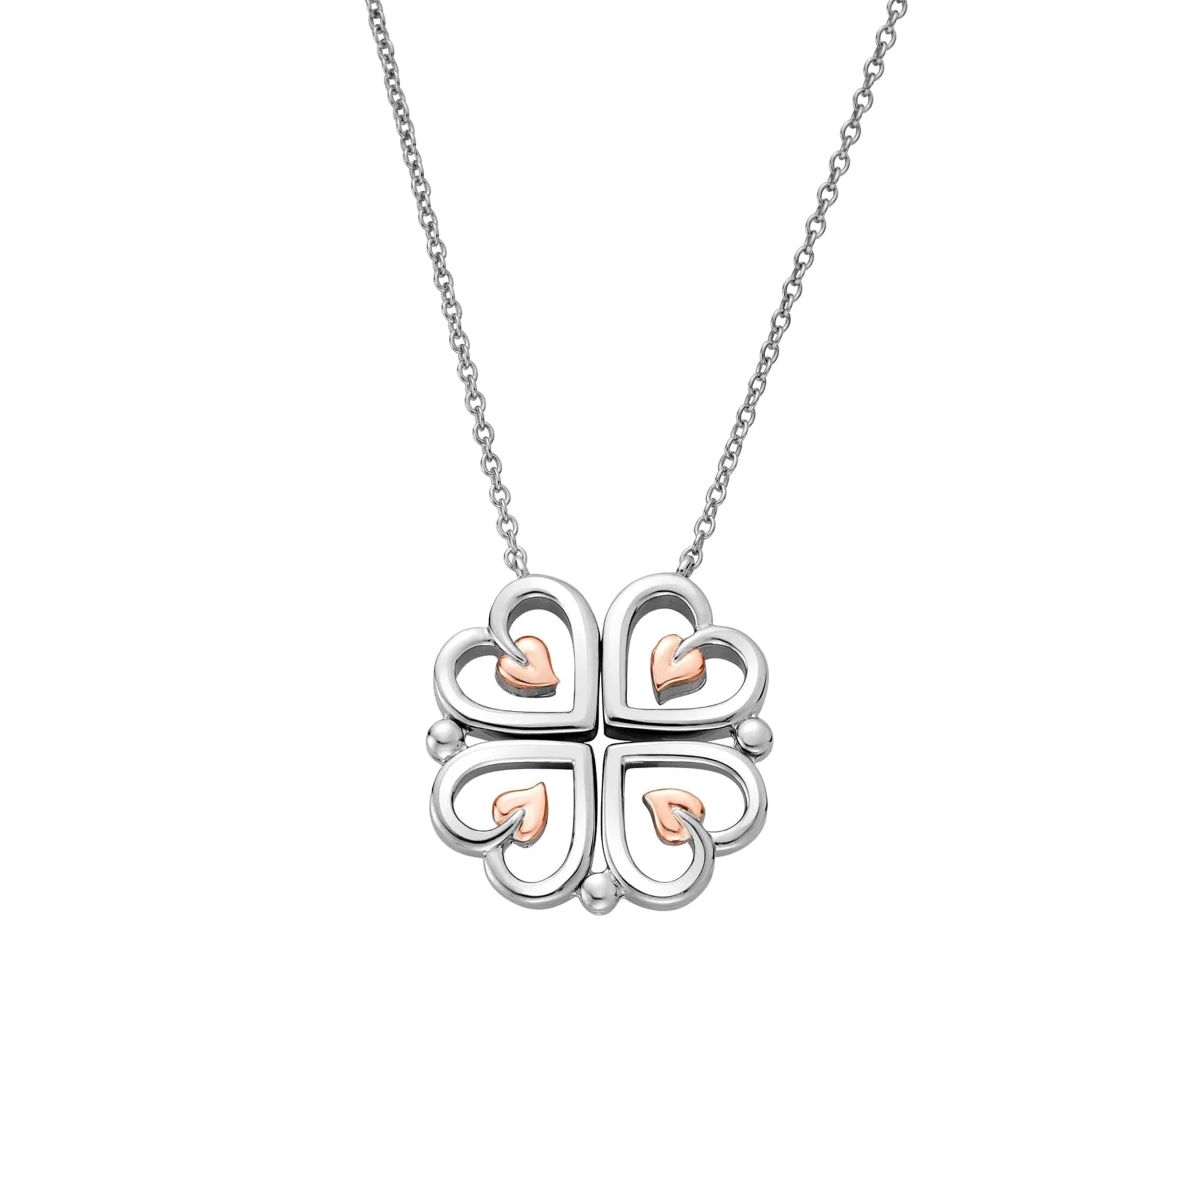 Clogau Tree of Life Heart Silver Necklace - 3STOL0623